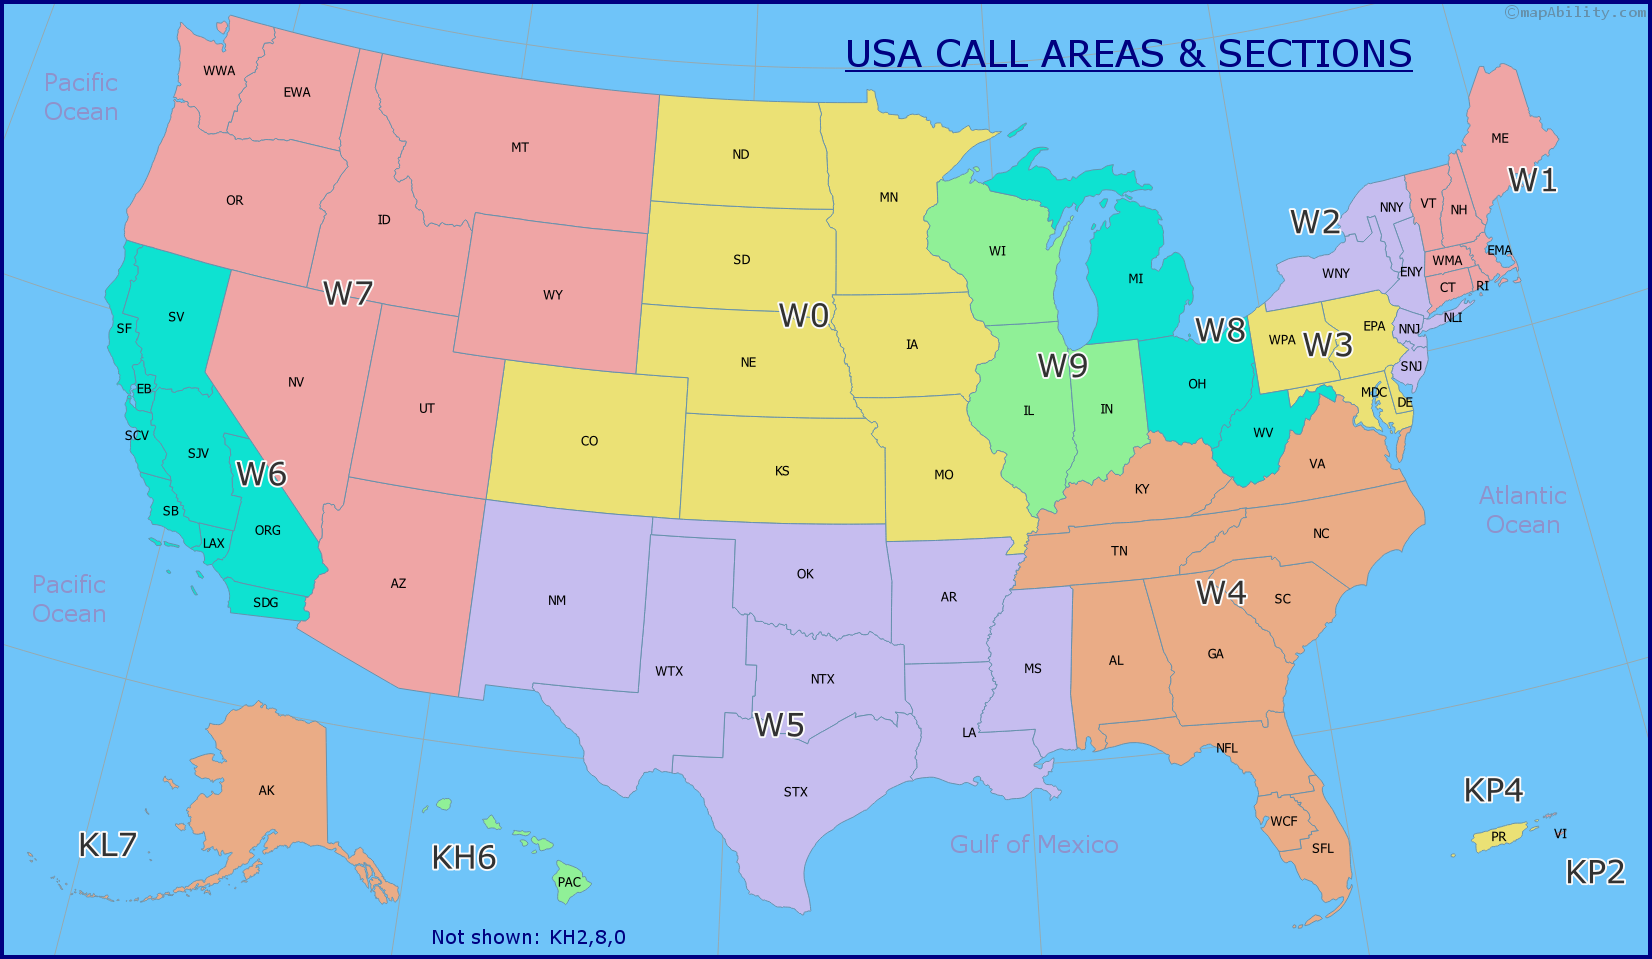 USA Call Areas and Sections